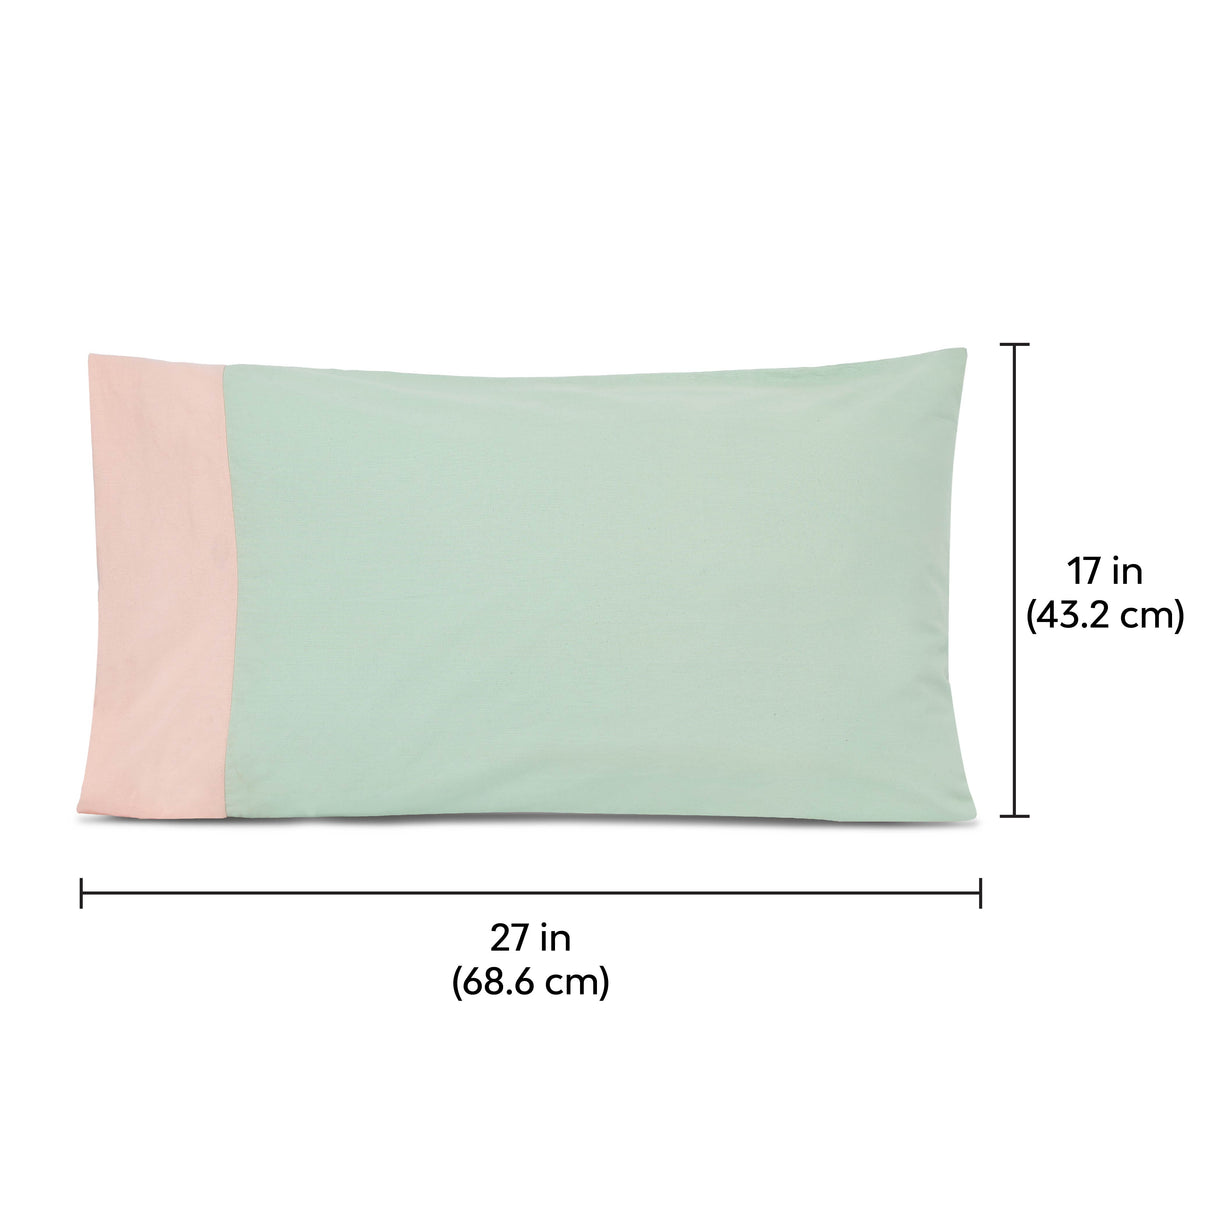 Pink and pista pillow cover dimensions